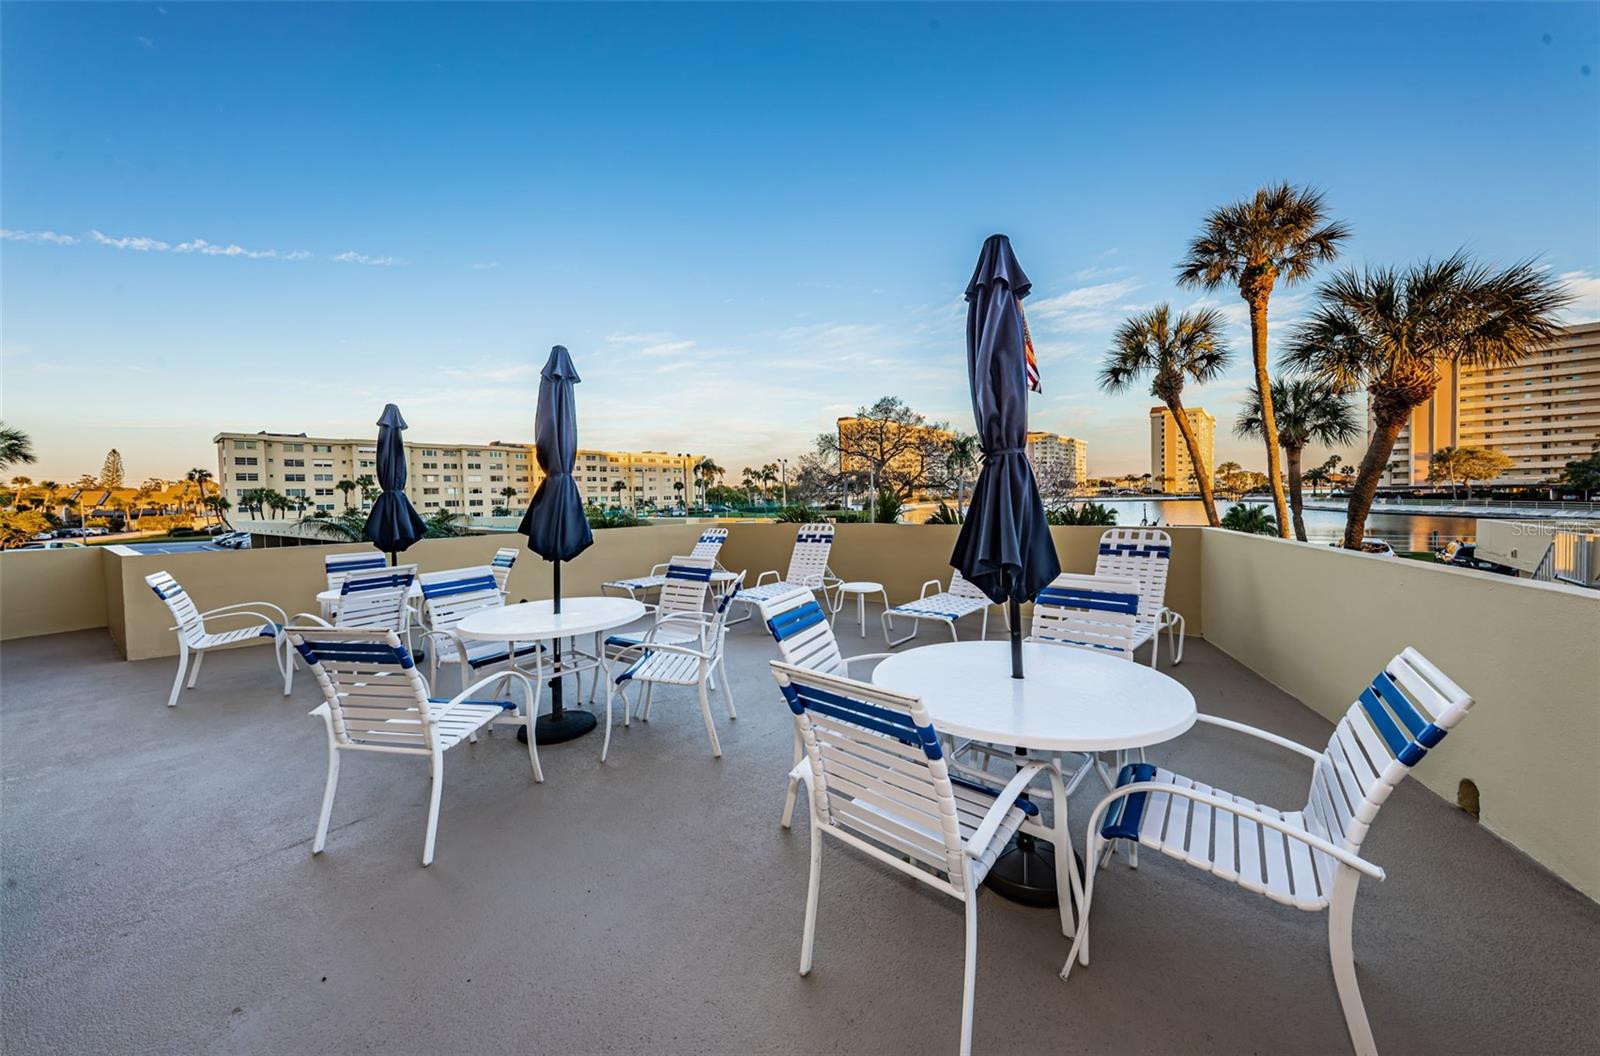 . 2nd Floor of the Columbia Enjoys a Roof Deck Overlooking the Lagoon. Each Building has It's Own Deck Area Besides Sharing Common Grounds - Pool Areas and Amenities. Shot #2..